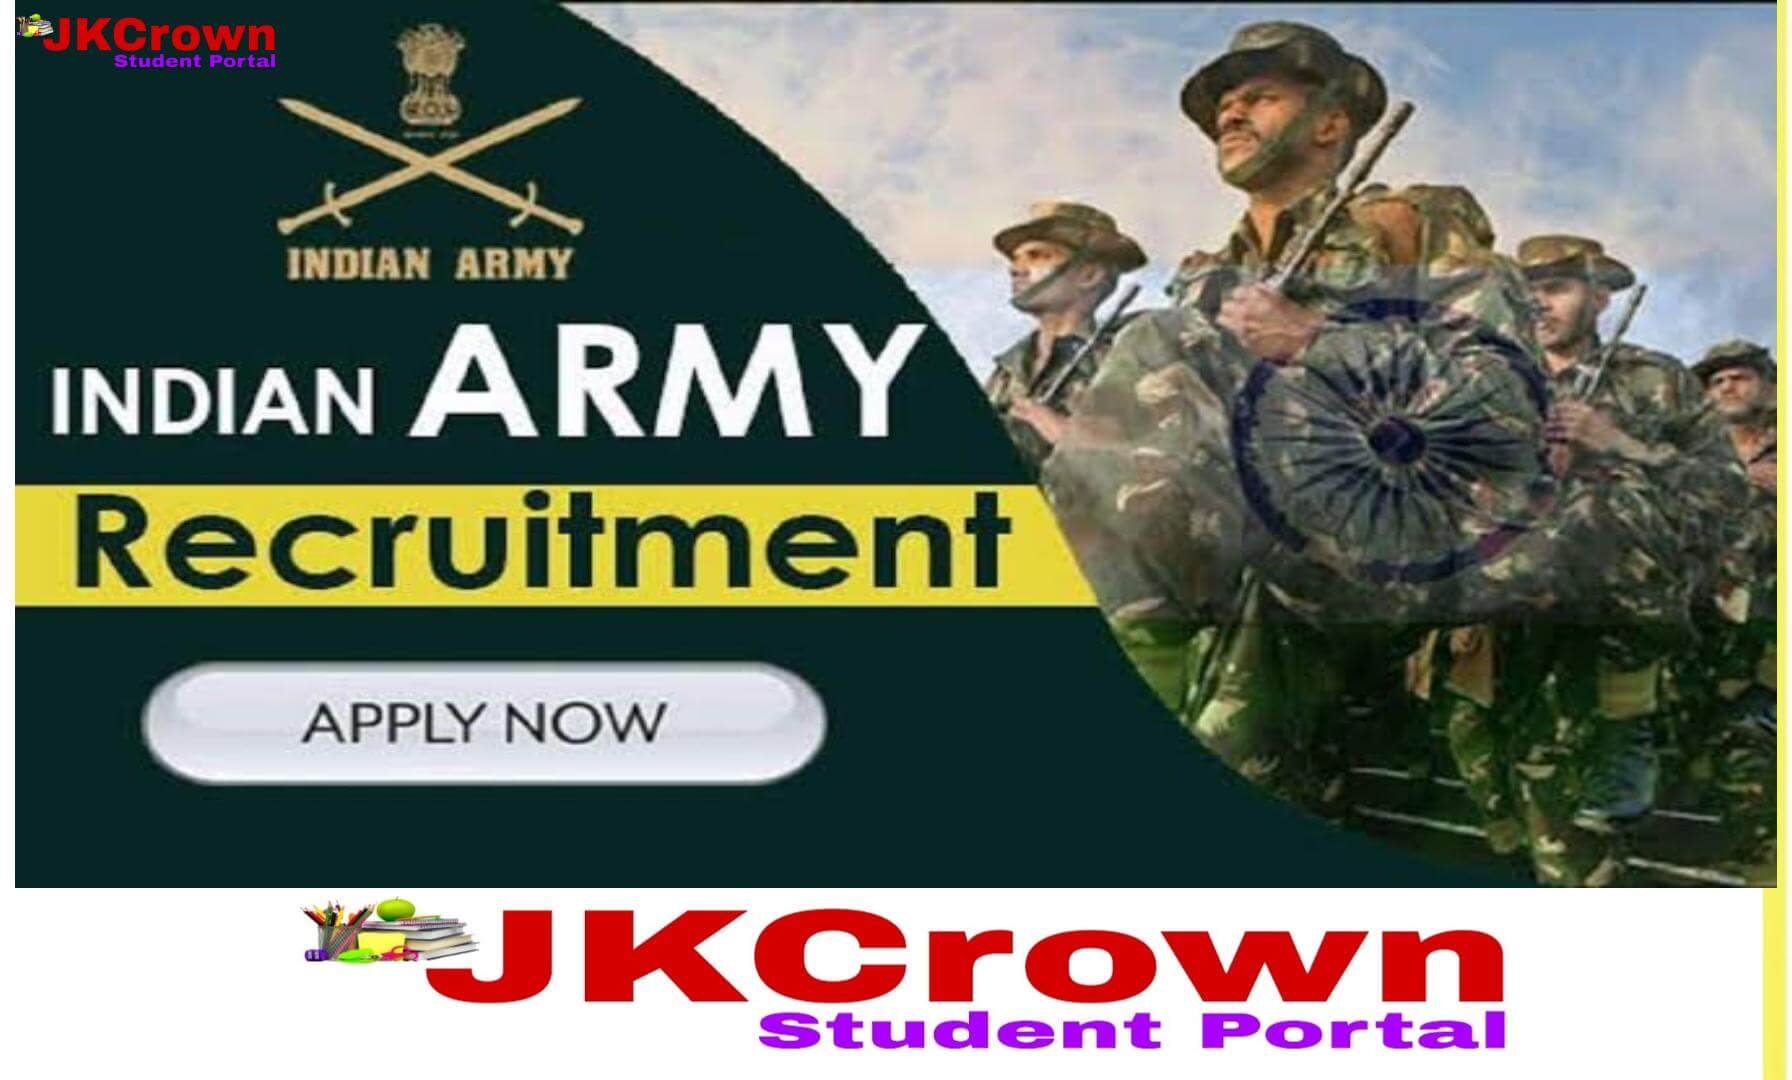 Indian Army Recruitment for Graduates Apply Here